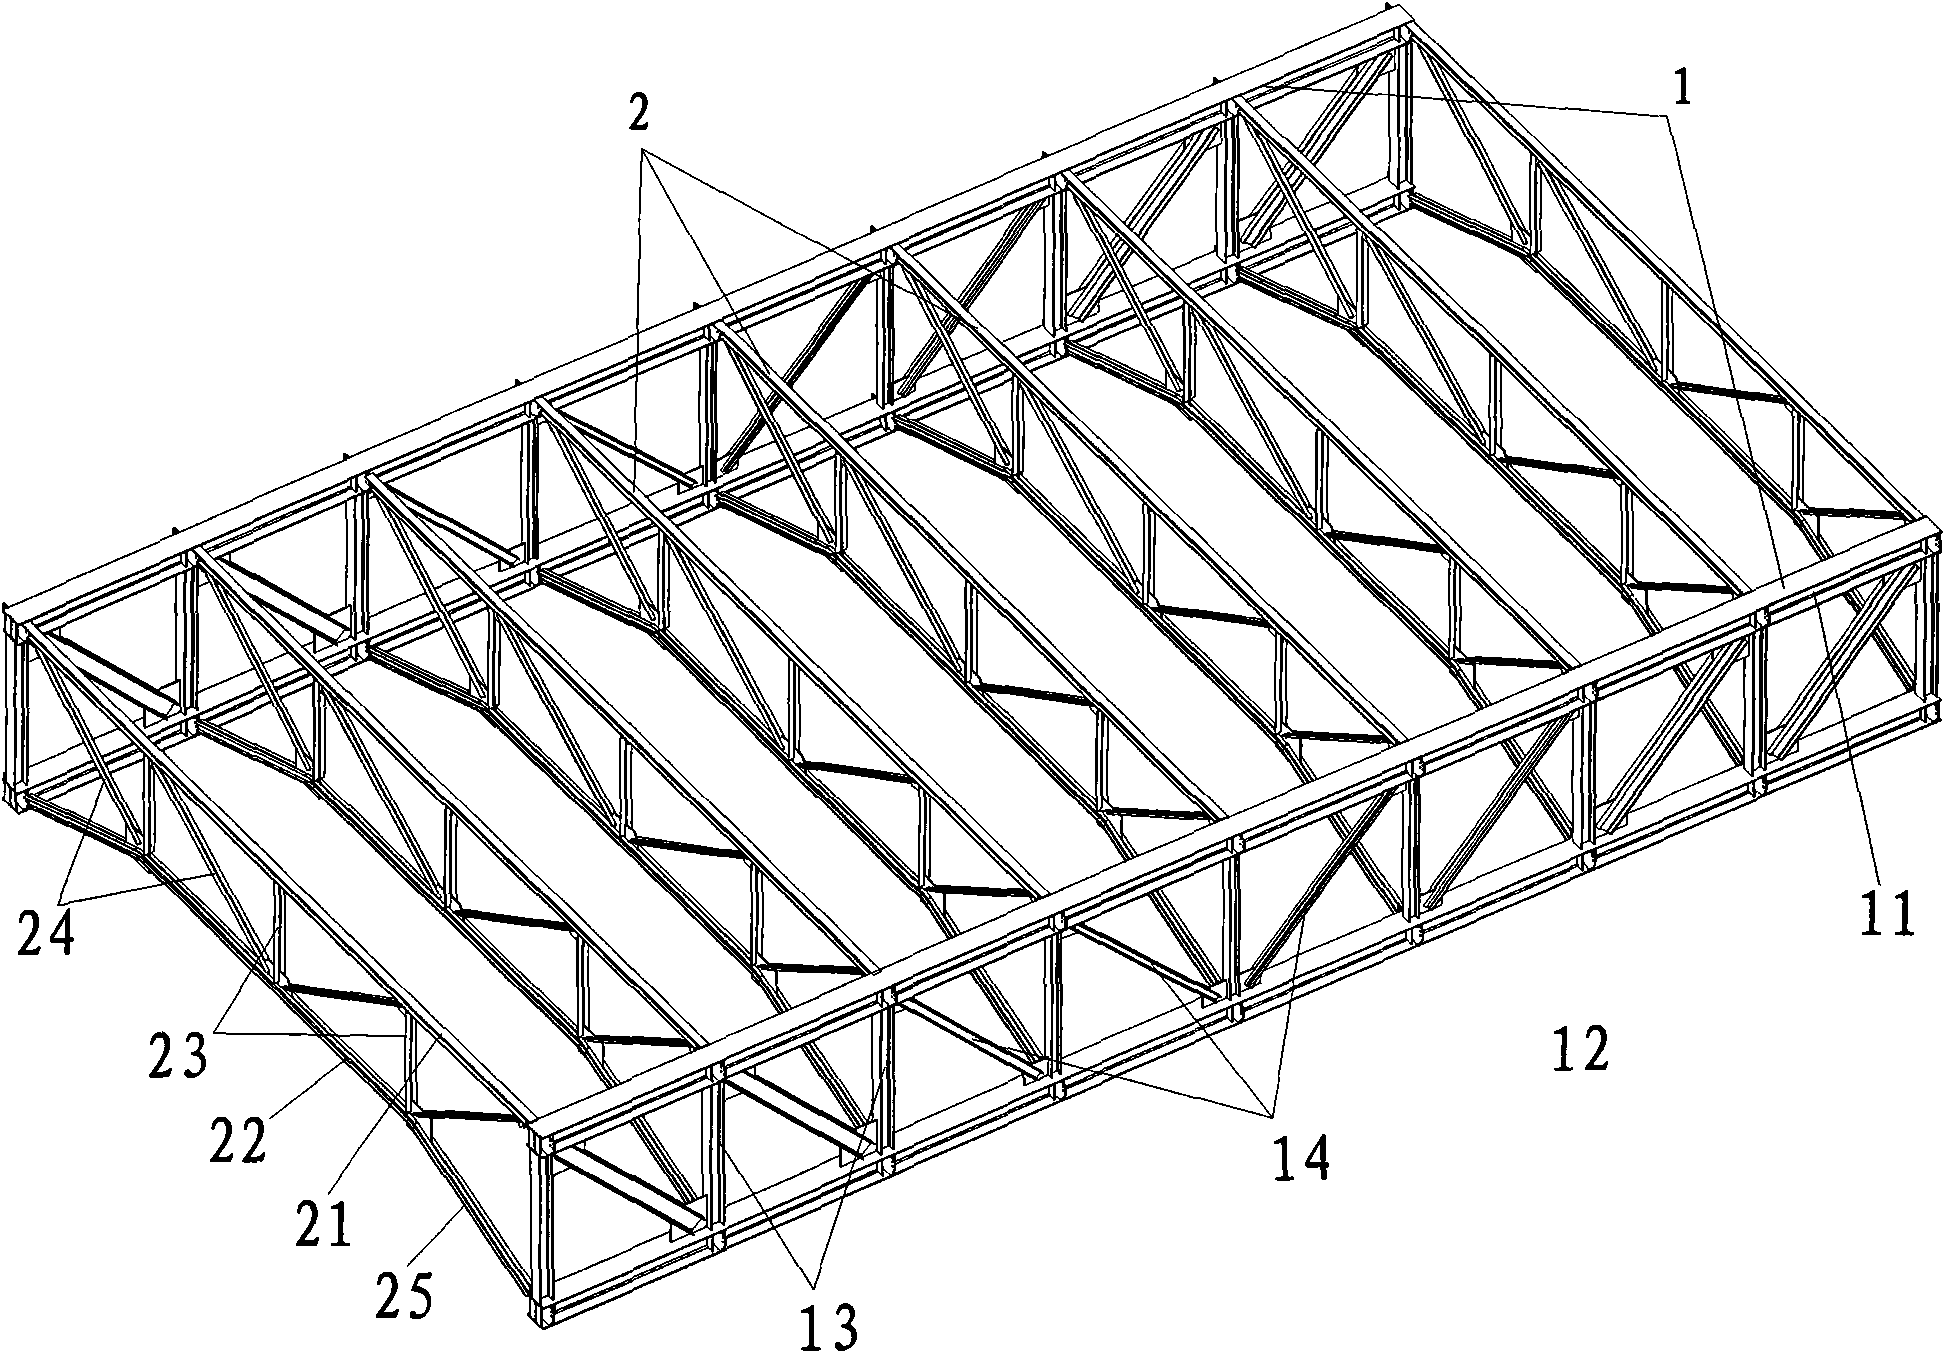 Steel roof system